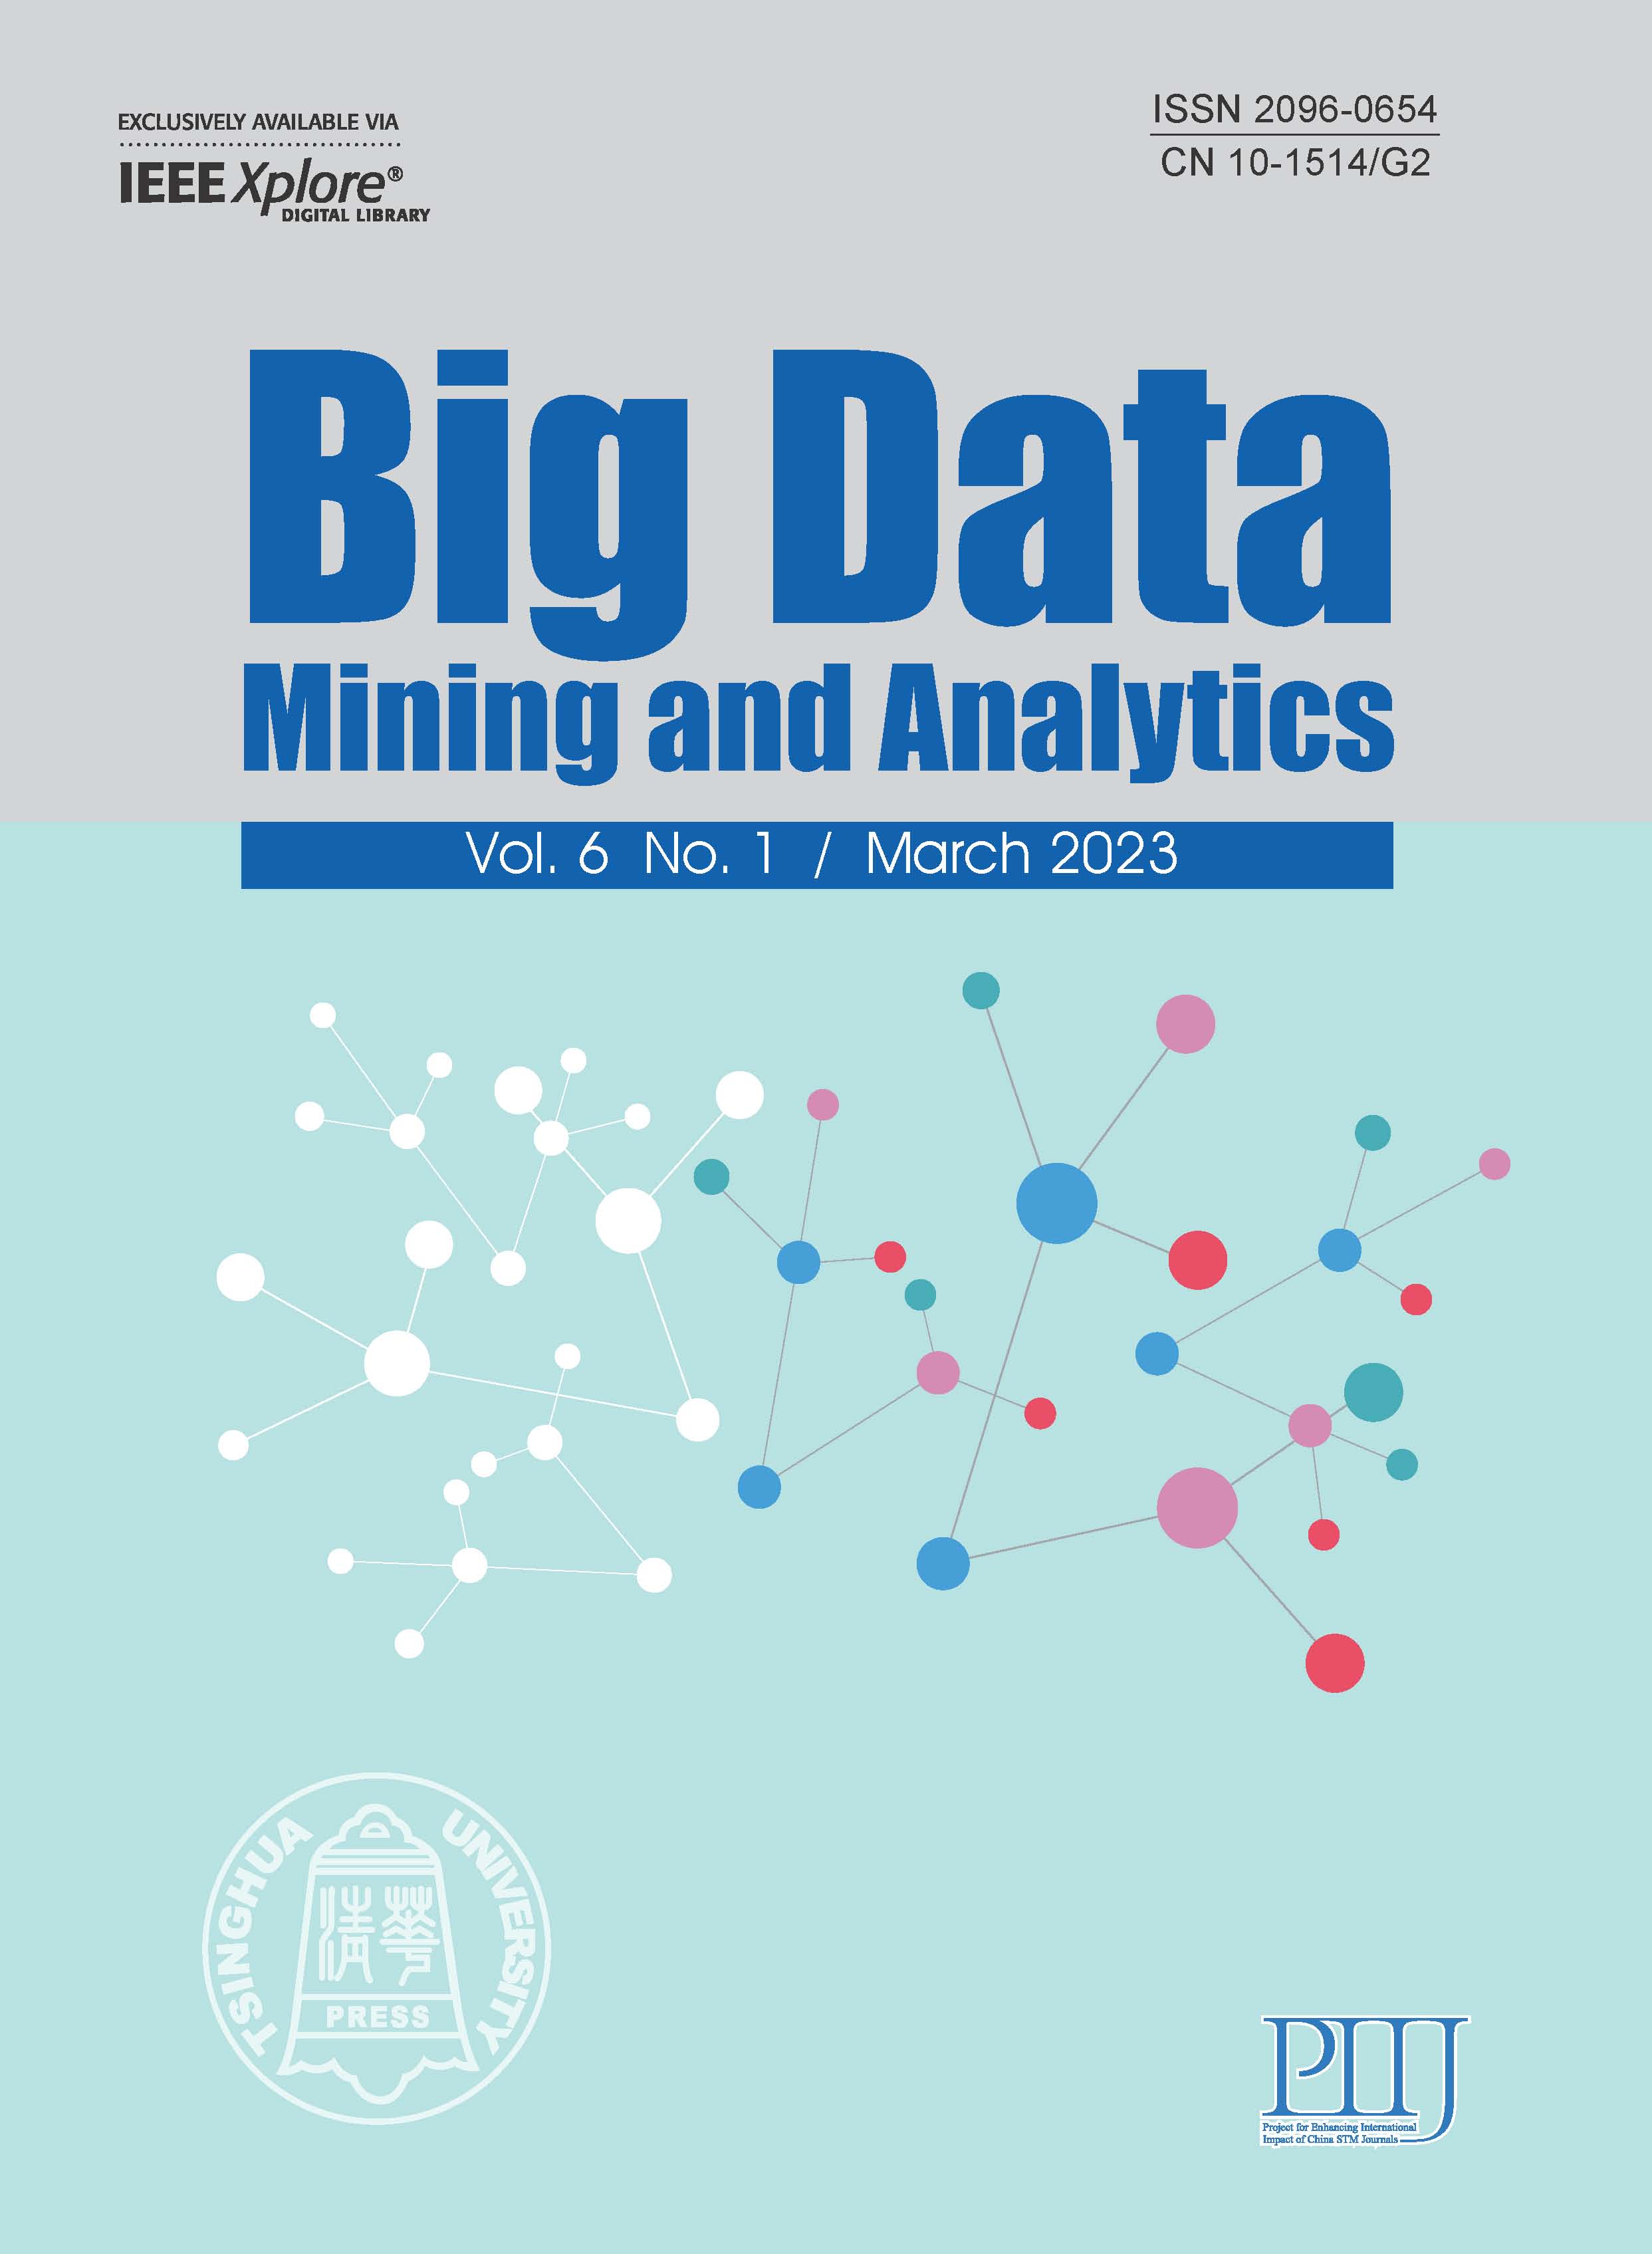 Big Data Mining and Analytics_6_1_cover.png